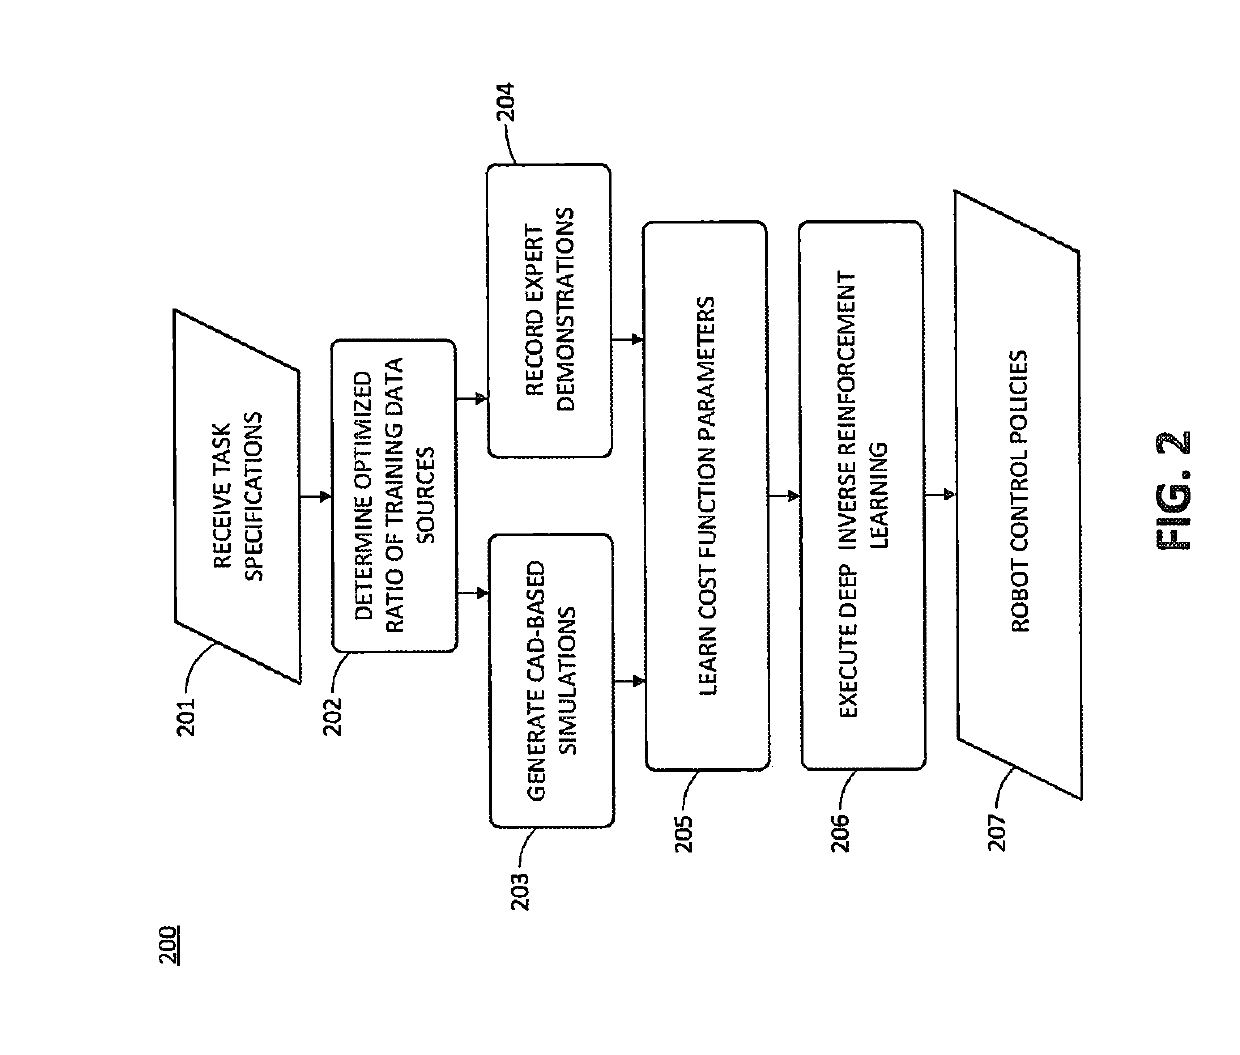 Method and system for automatic robot control policy generation via cad-based deep inverse reinforcement learning